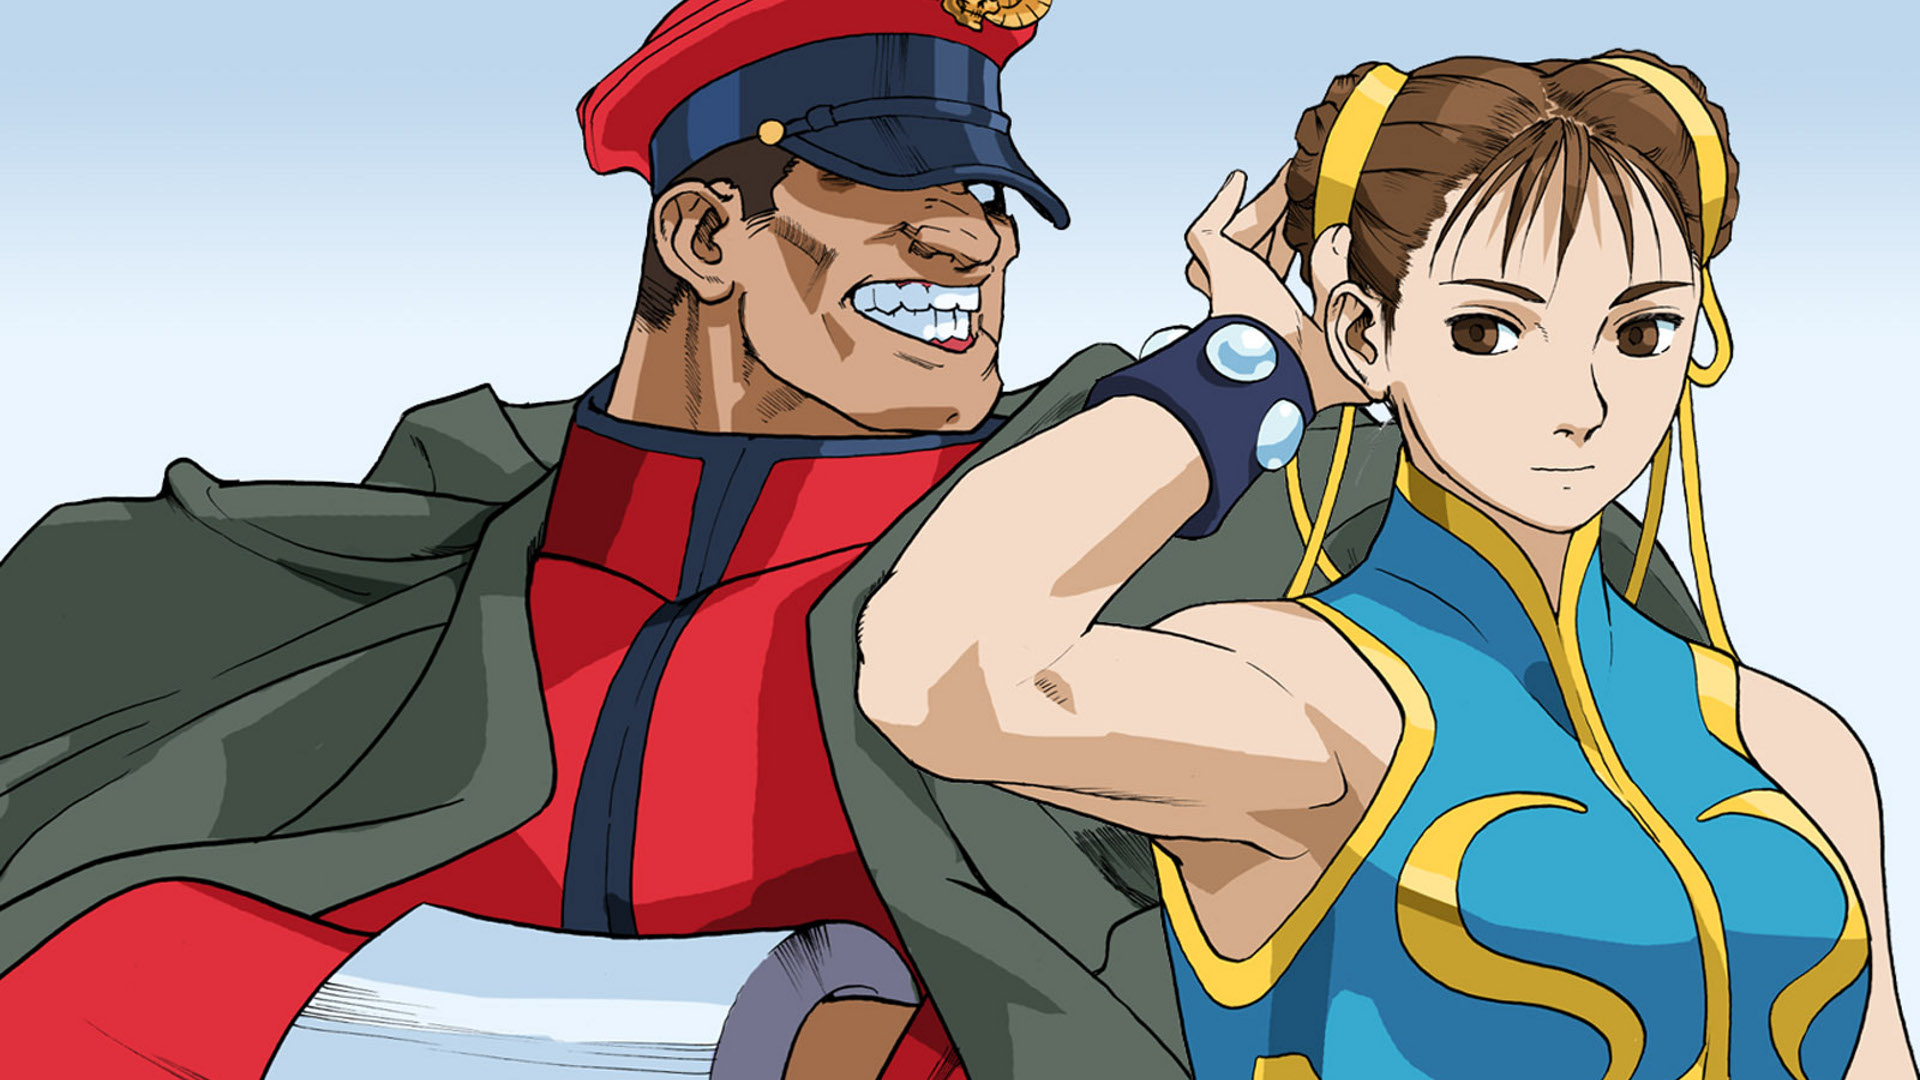 Video Game Street Fighter Alpha 3 HD Wallpaper | Background Image